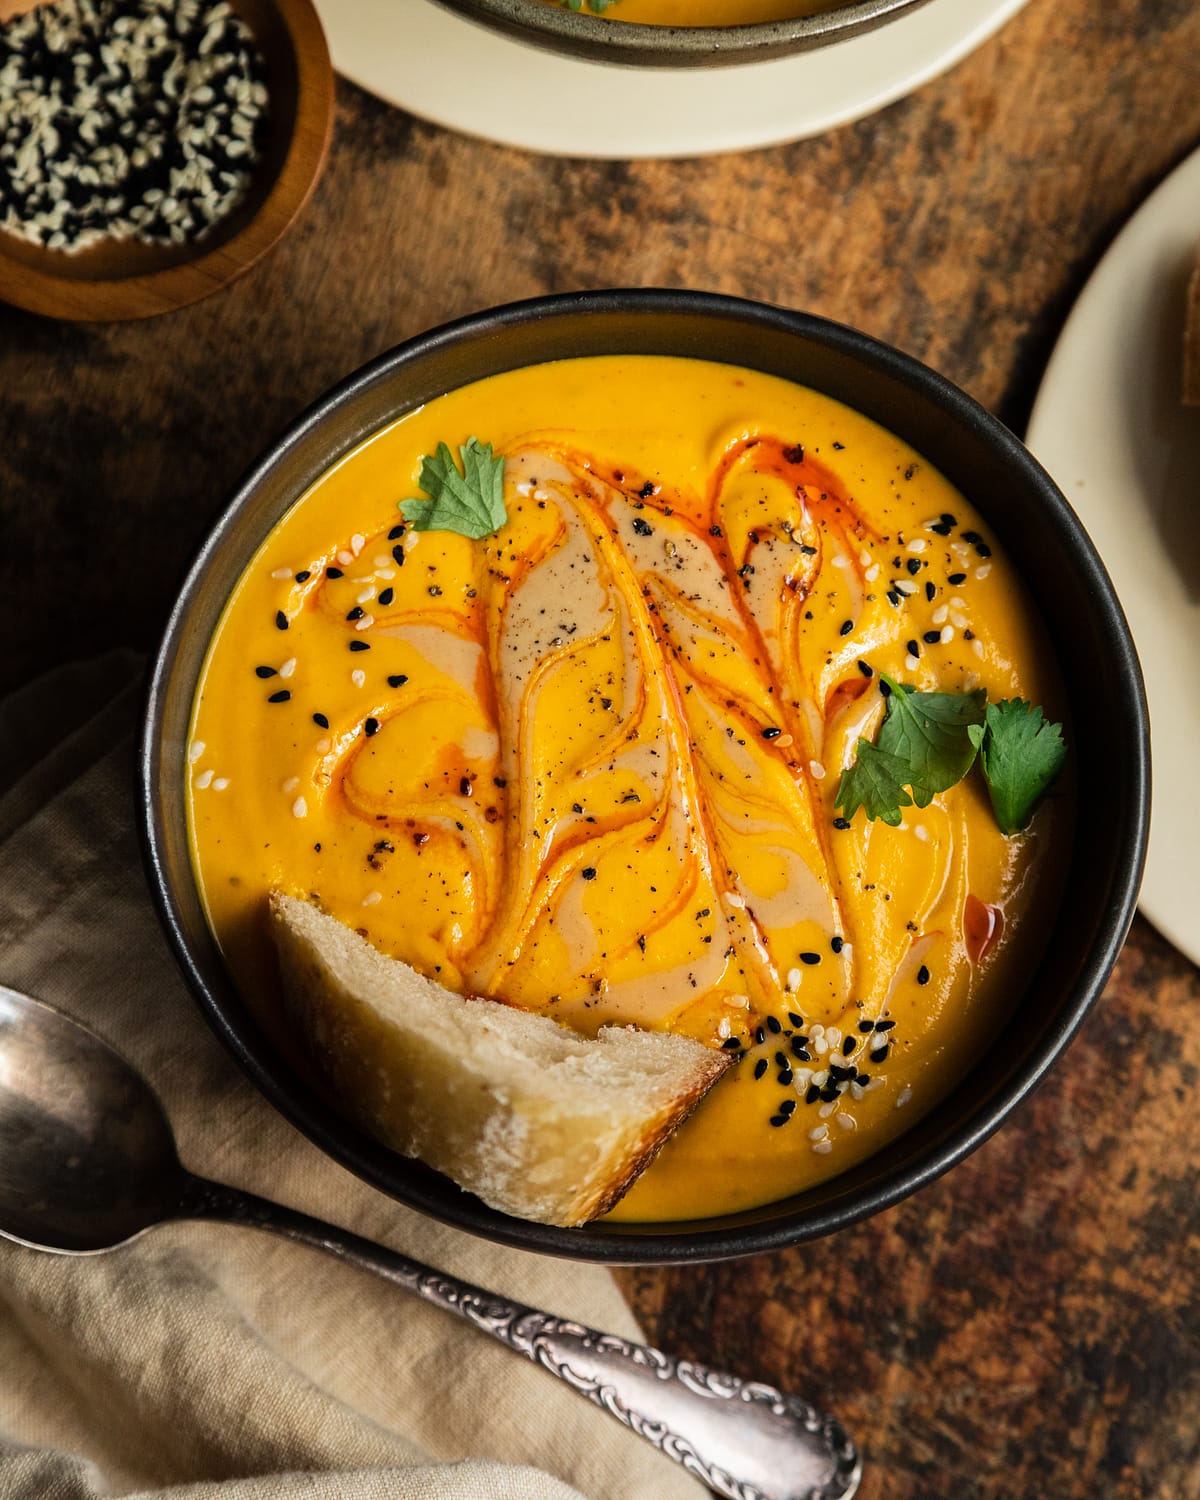 An overhead shot of a bowl of vibrant and creamy orange soup that is swirled with a red slick of oil on top. The soup has a crust of bread in it and is also garnished with sesame seeds and cilantro.